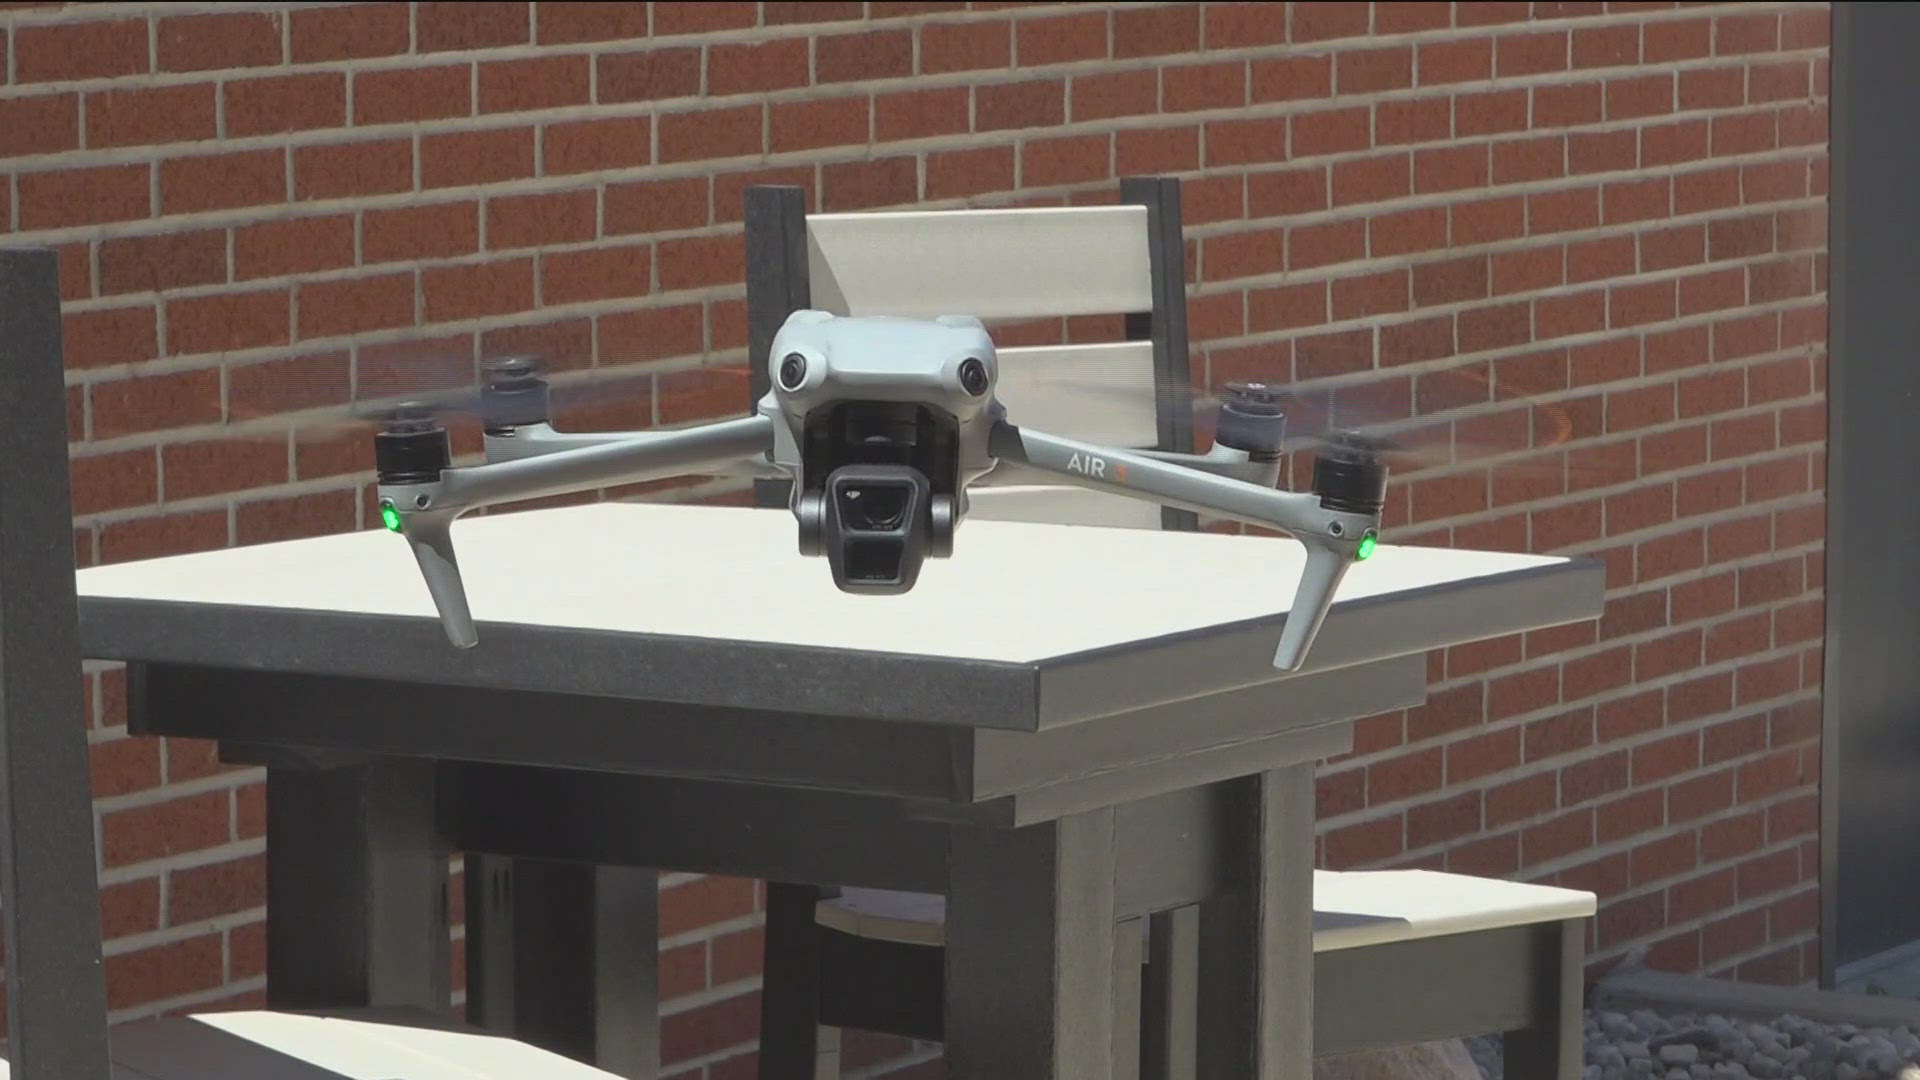 The university has partnerships with the Ohio State Highway Patrol, Ohio Department of Transportation and lots of other fields to start using drone technology.